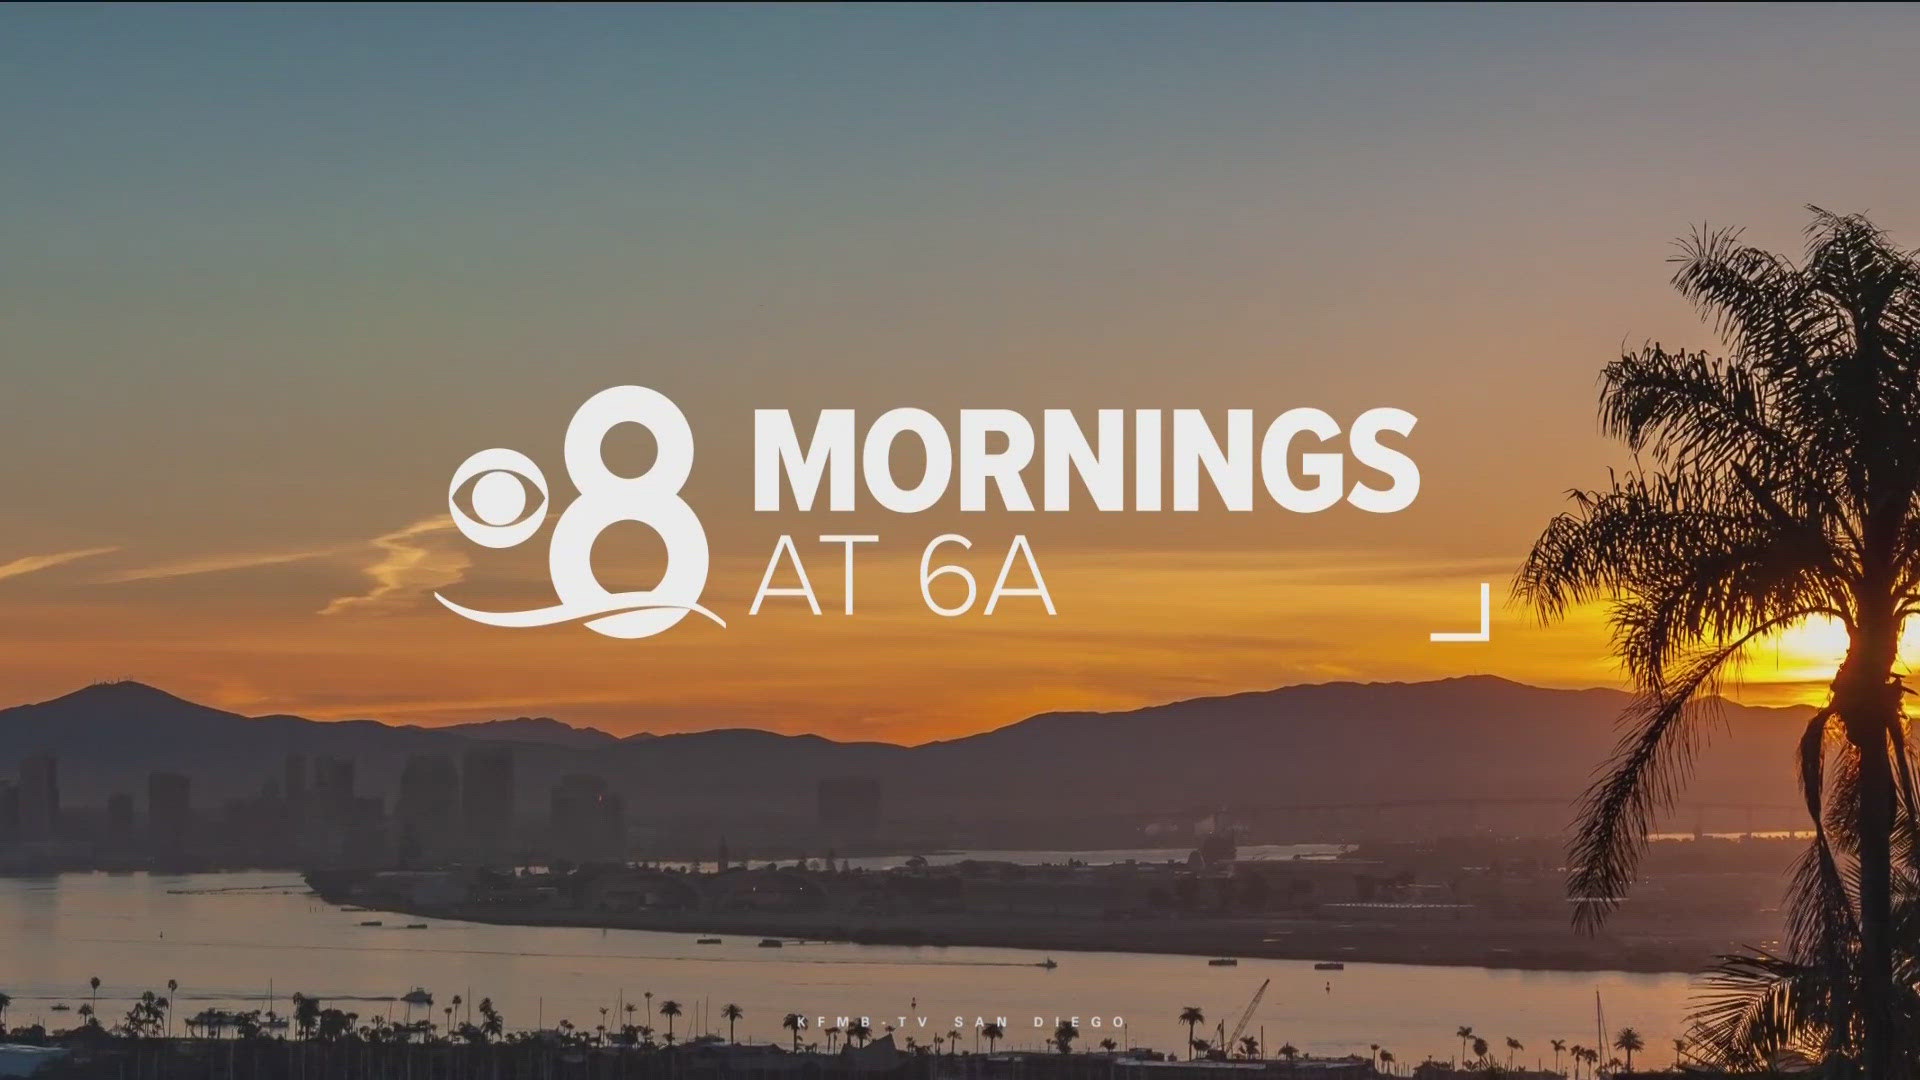 Here are the top stories around San Diego County for the morning of Monday, April 29.
For the latest news, weather and sports, head to:
https://www.cbs8.com/